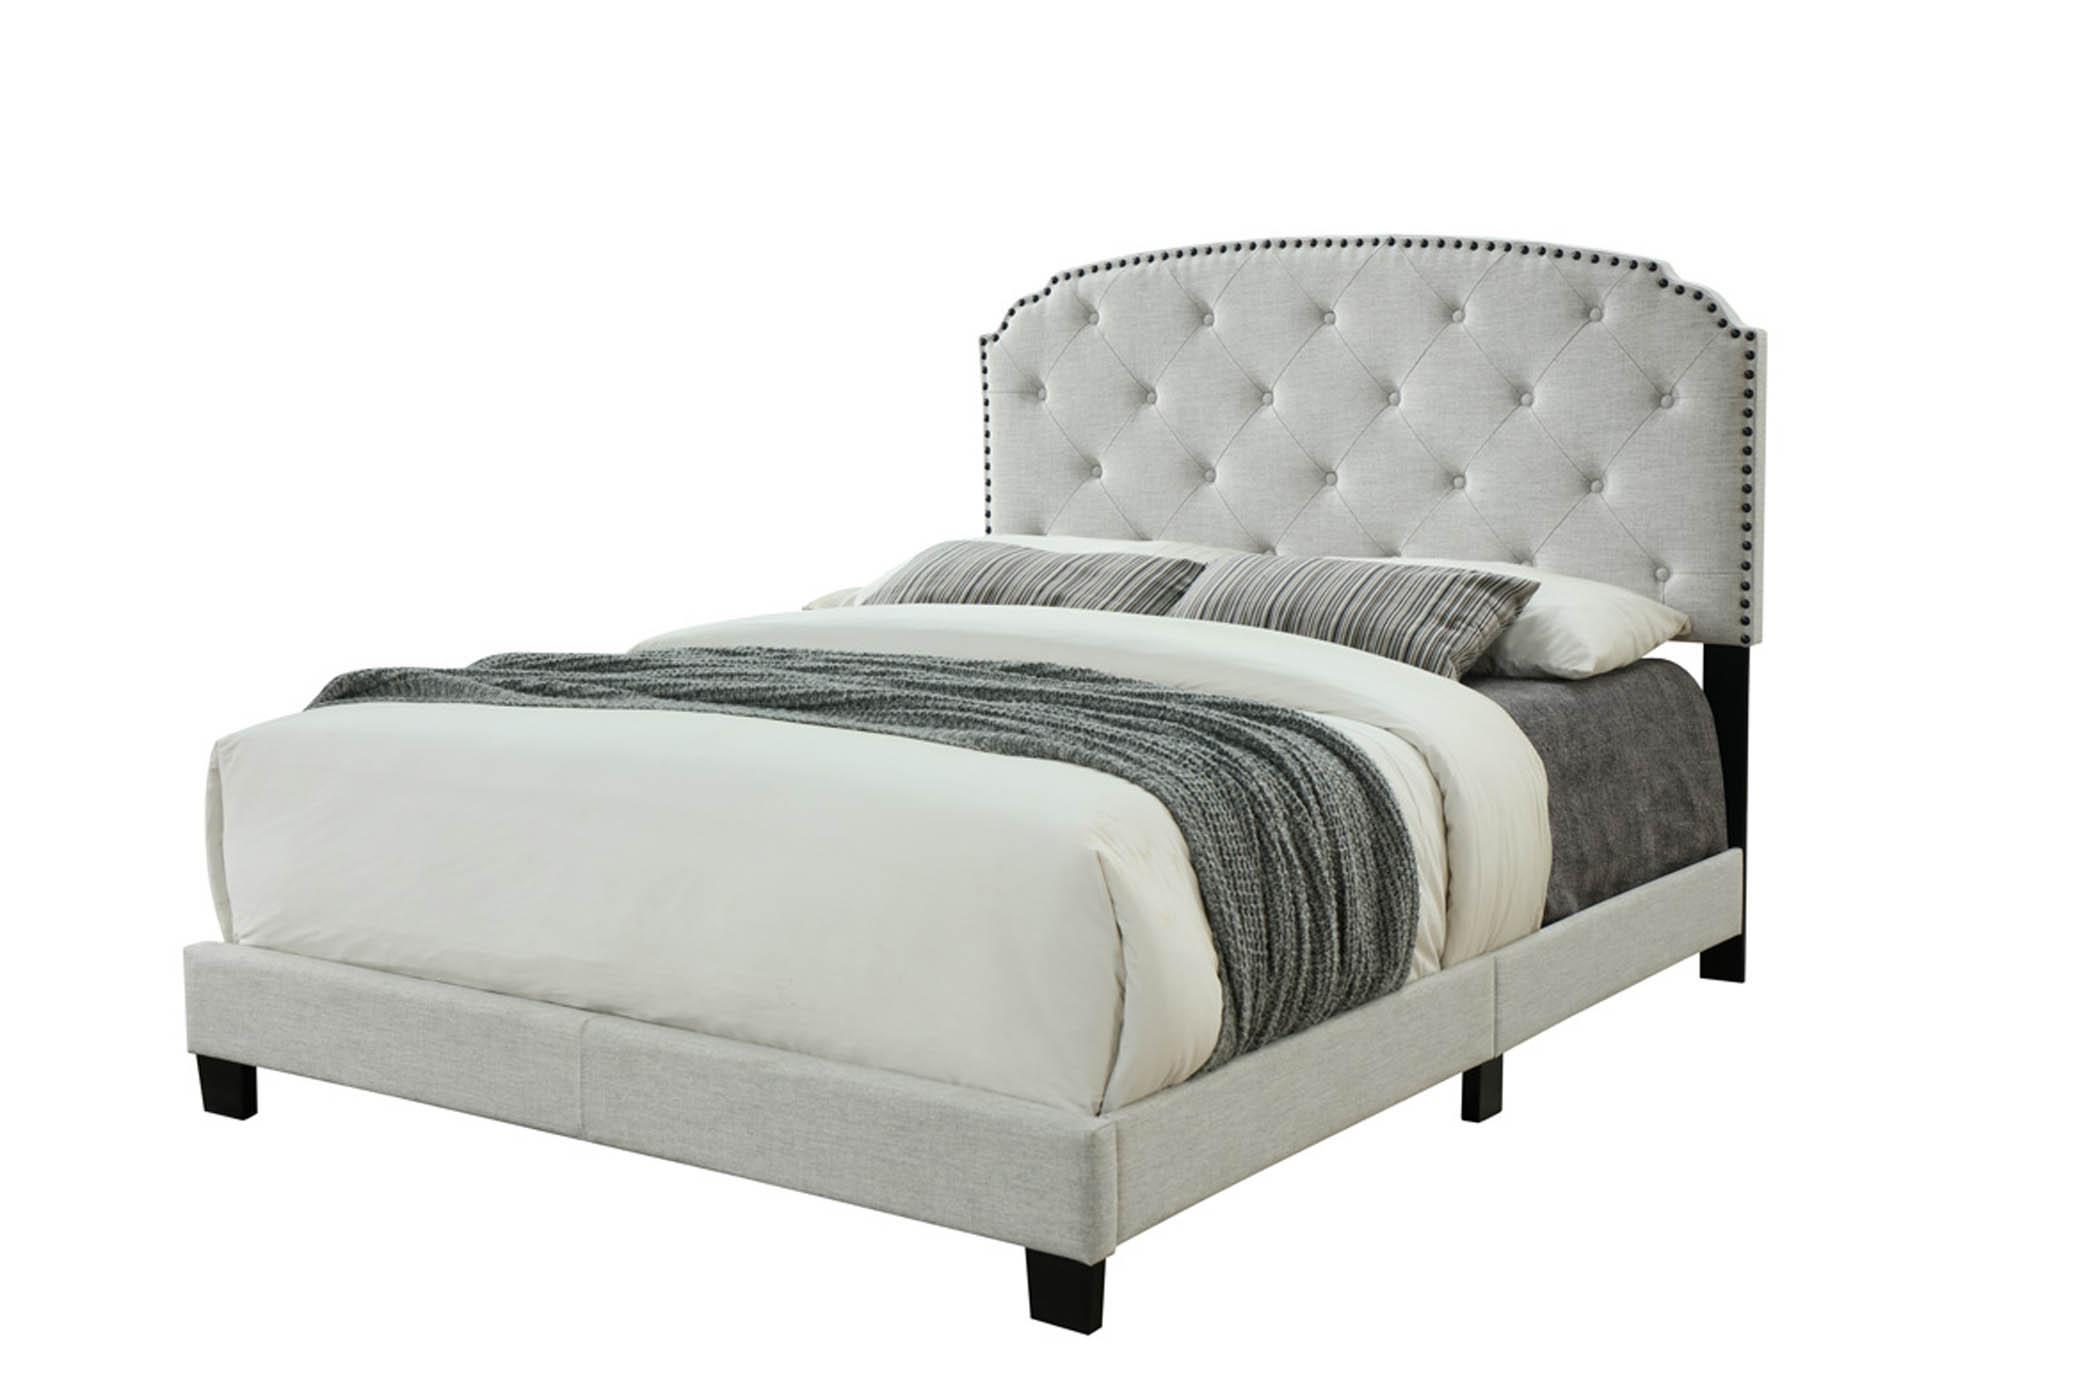 Modern, Transitional Panel Bed OLIVIA 1602DS-105 1602DS-105 in Light Gray Fabric